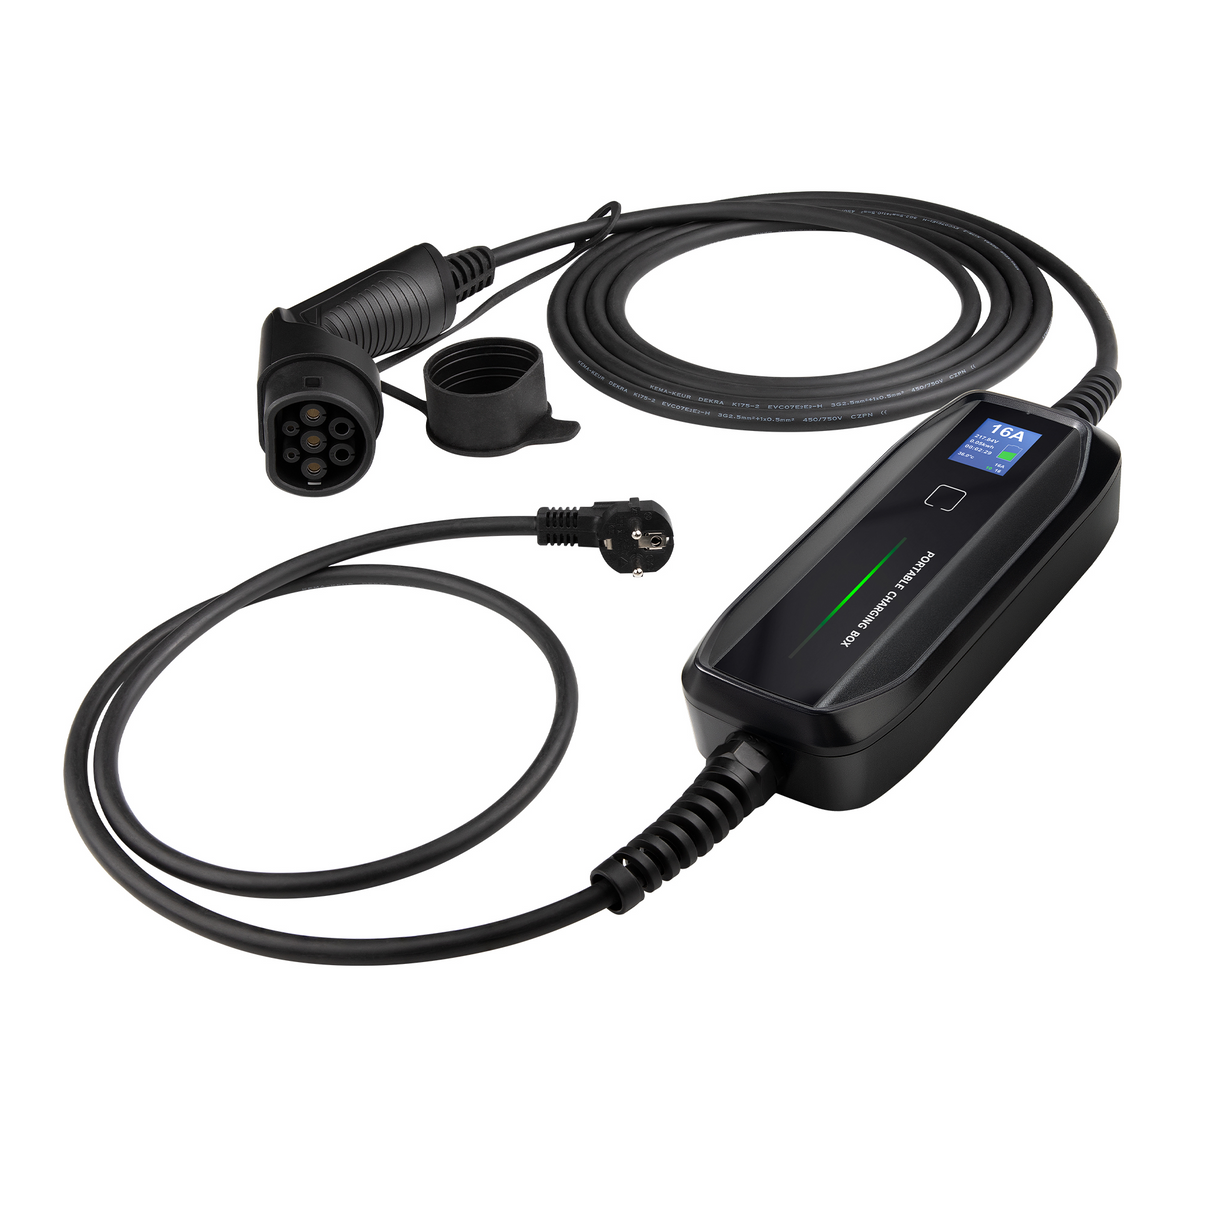 Mobile charger Seat Leon - Besen with LCD - Type 2 to Schuko